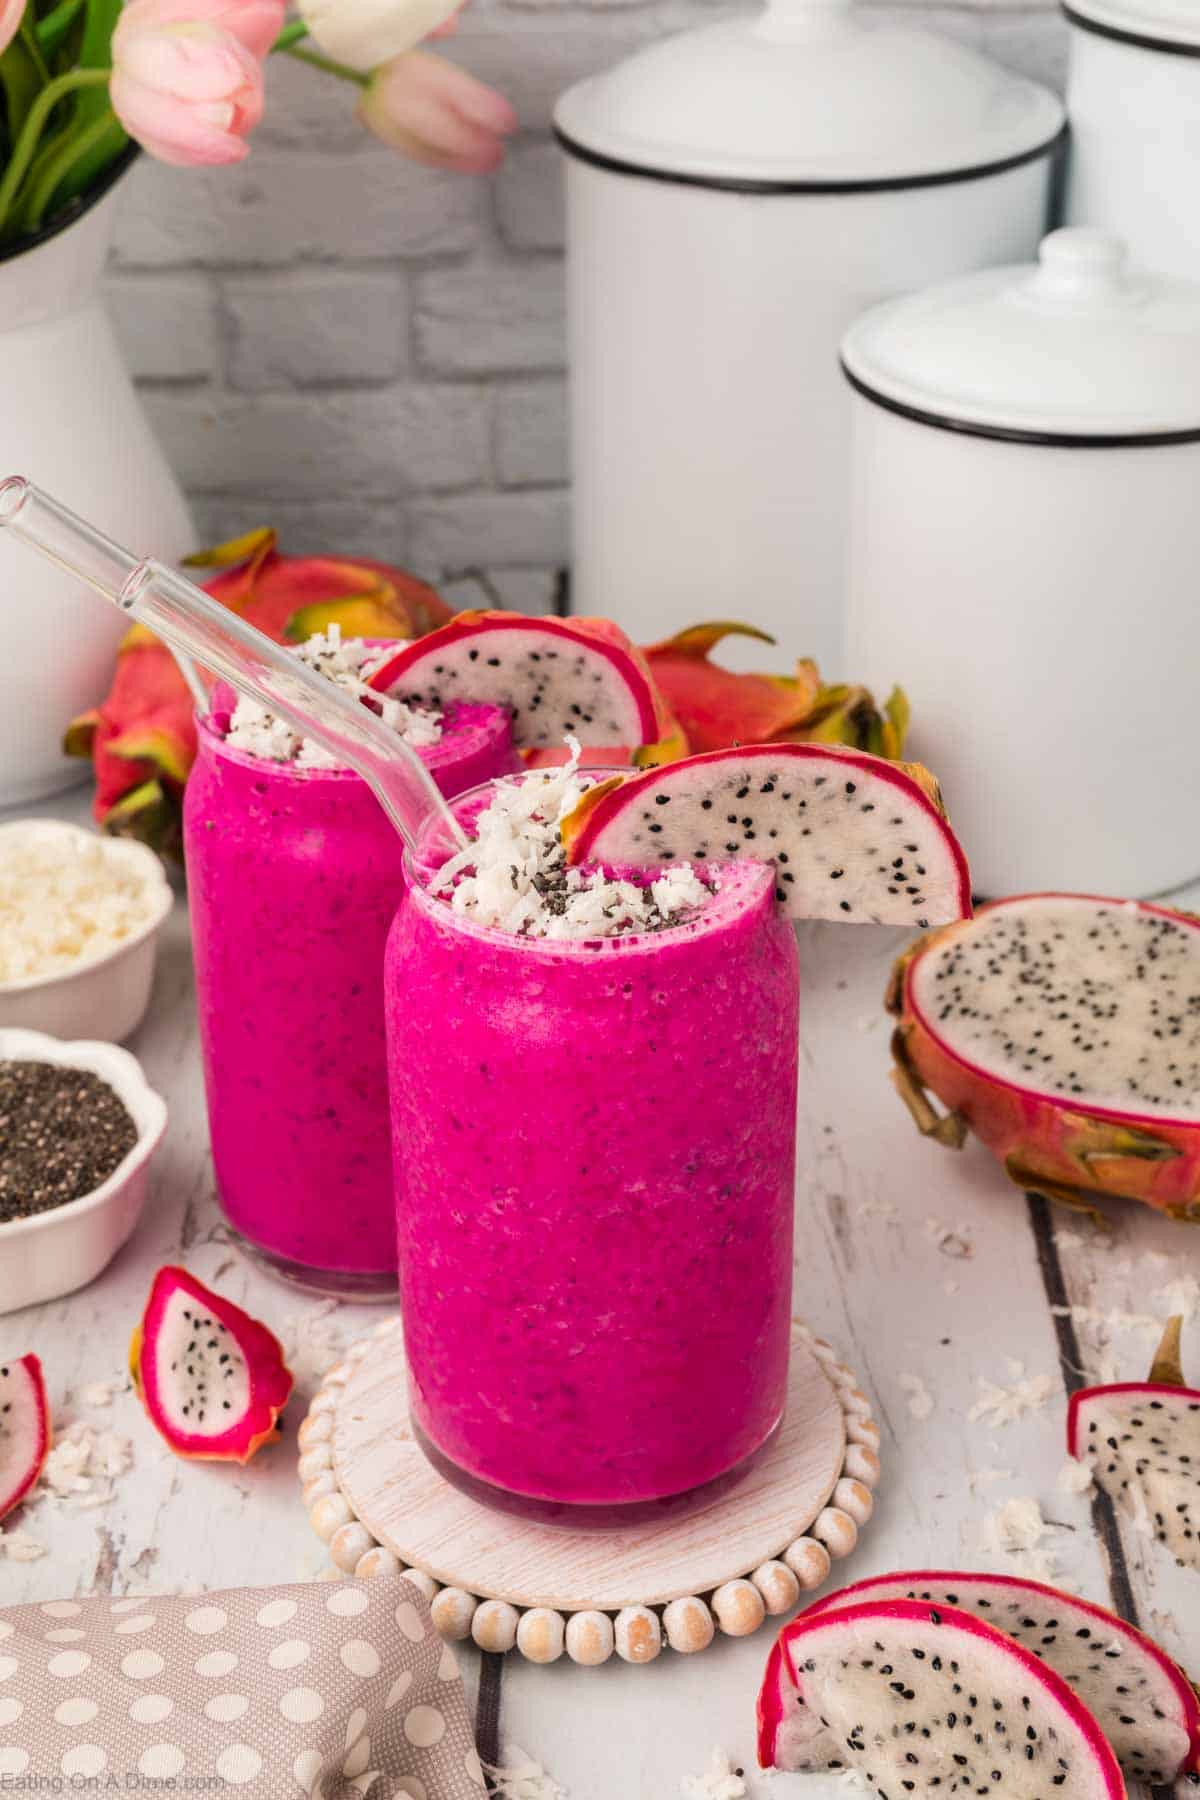 Dragon Fruit Smoothies in a clear glass topped with shredded coconut, slice of dragon fruit with slice of fresh dragon fruit on the sides with bowls of chia seeds and shredded coconut